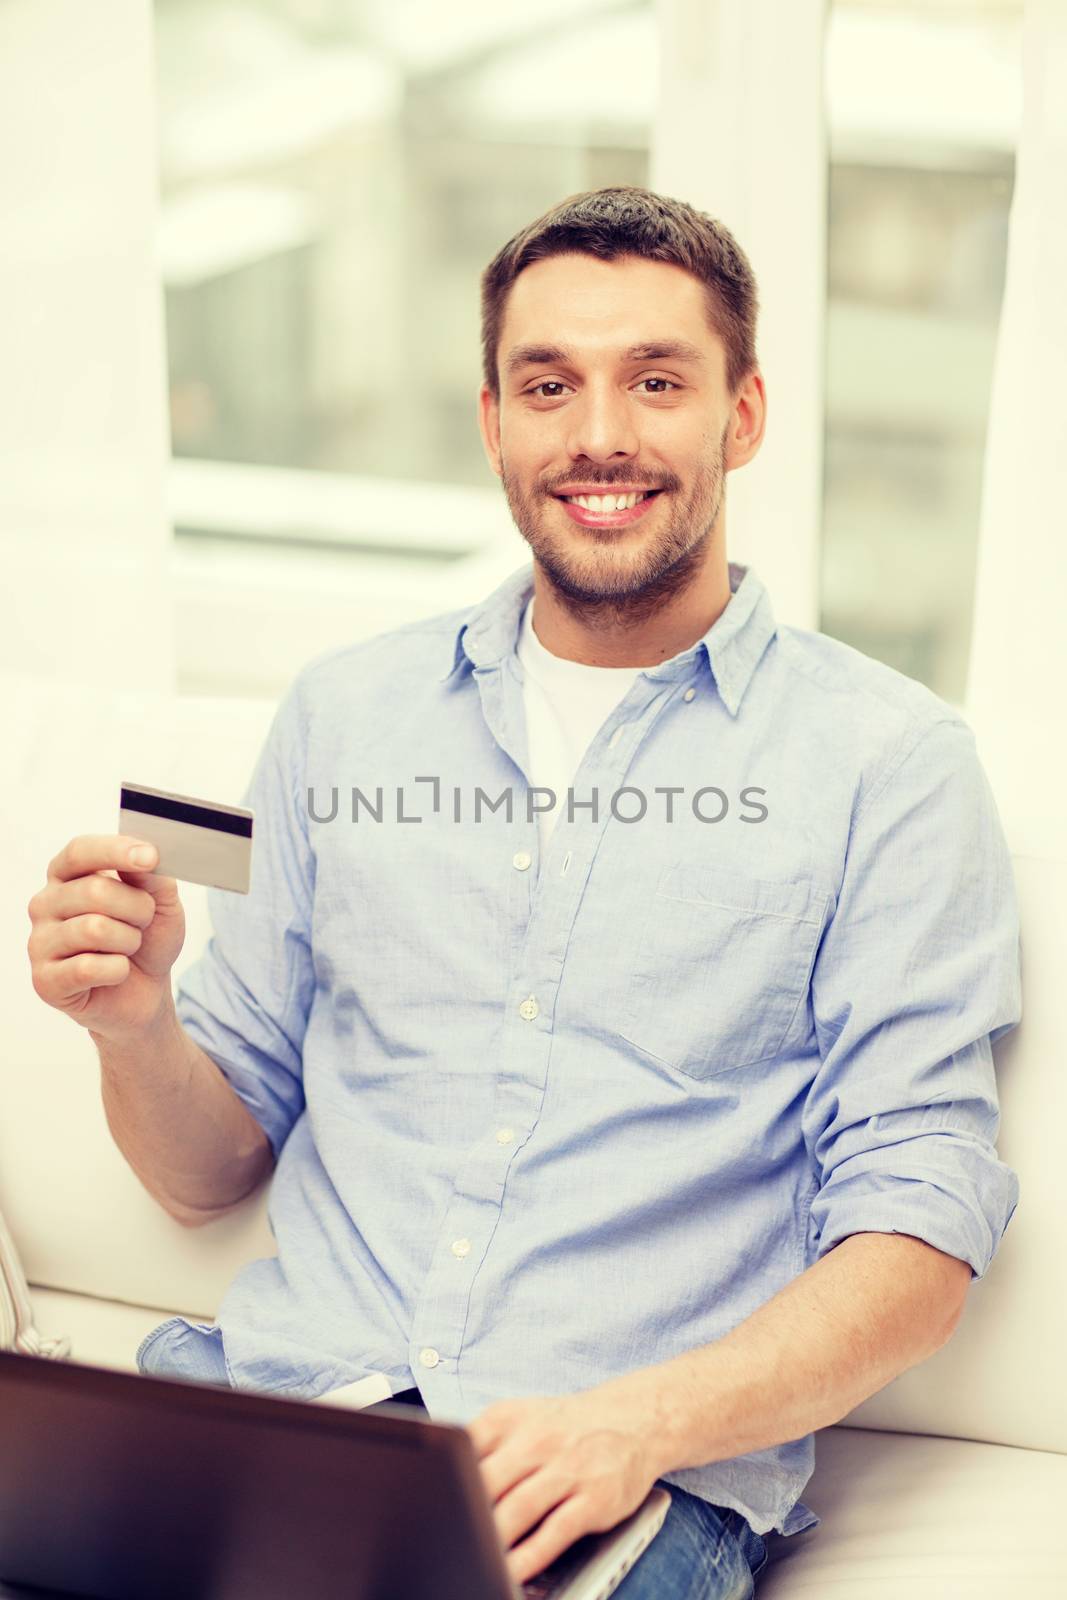 technology, home and lifestyle concept - smiling man working with laptop and credit card at home